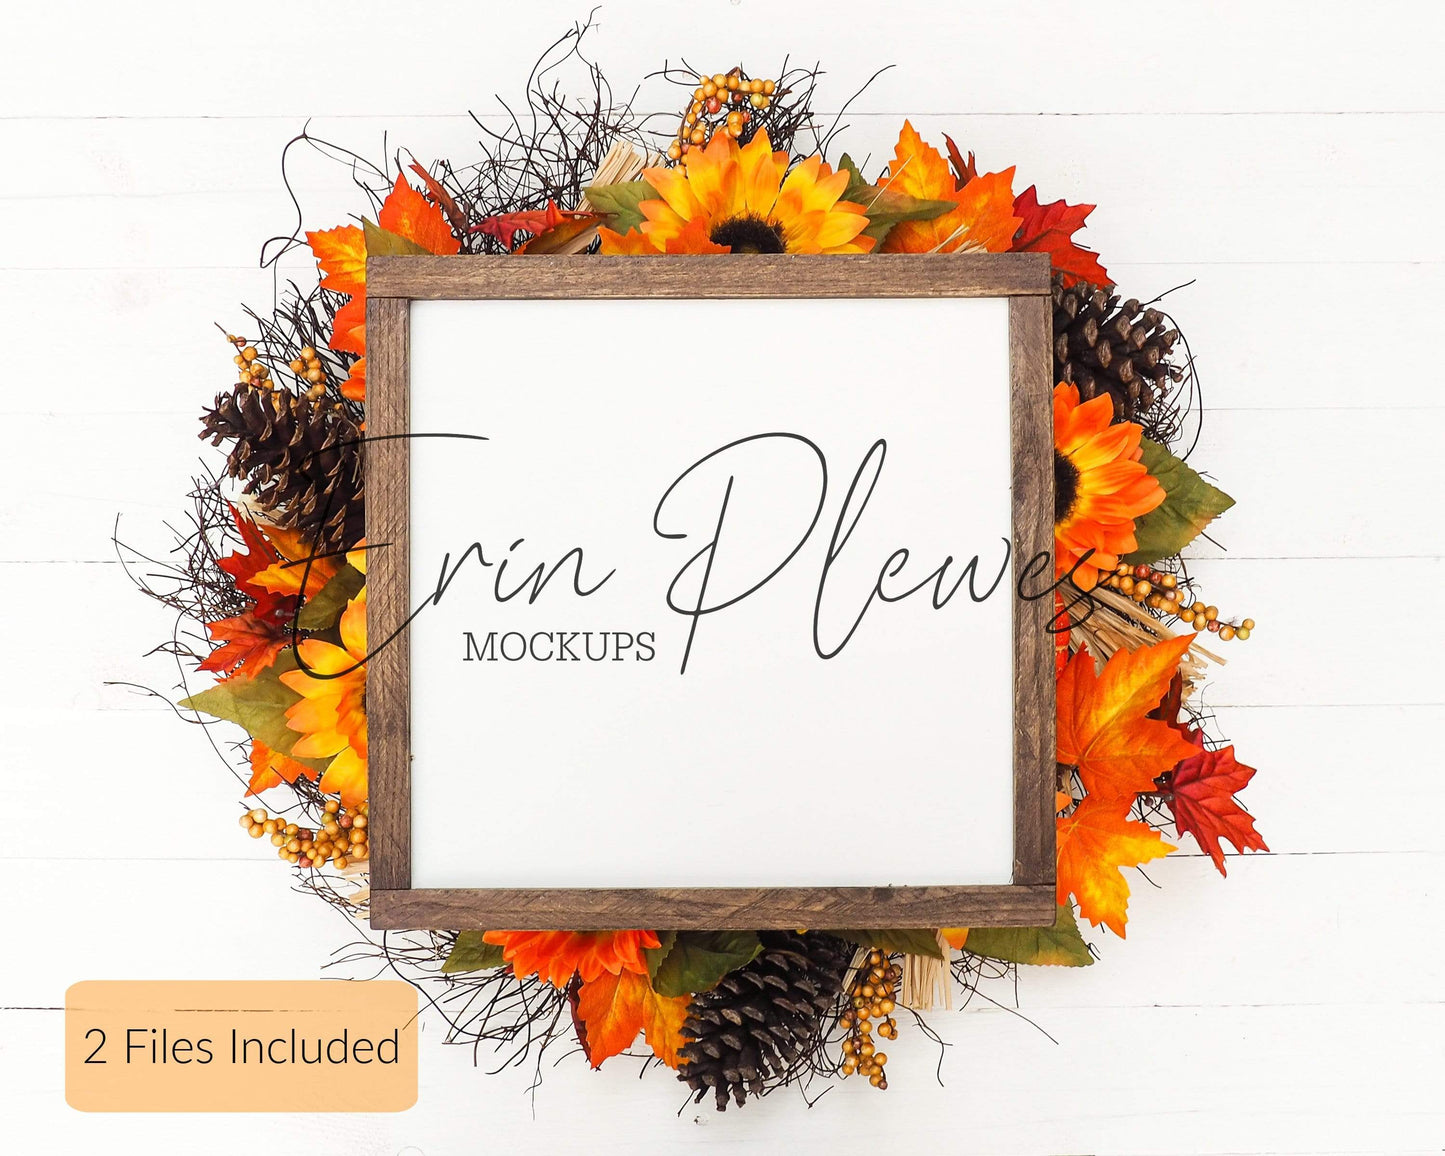 Erin Plewes Mockups Wood Sign Mockup 12x12, Rustic Wood Frame Mock Up, Fall Sign Flat Lay with Pumpkins and Sunflowers, Farmhouse Style Mock-up